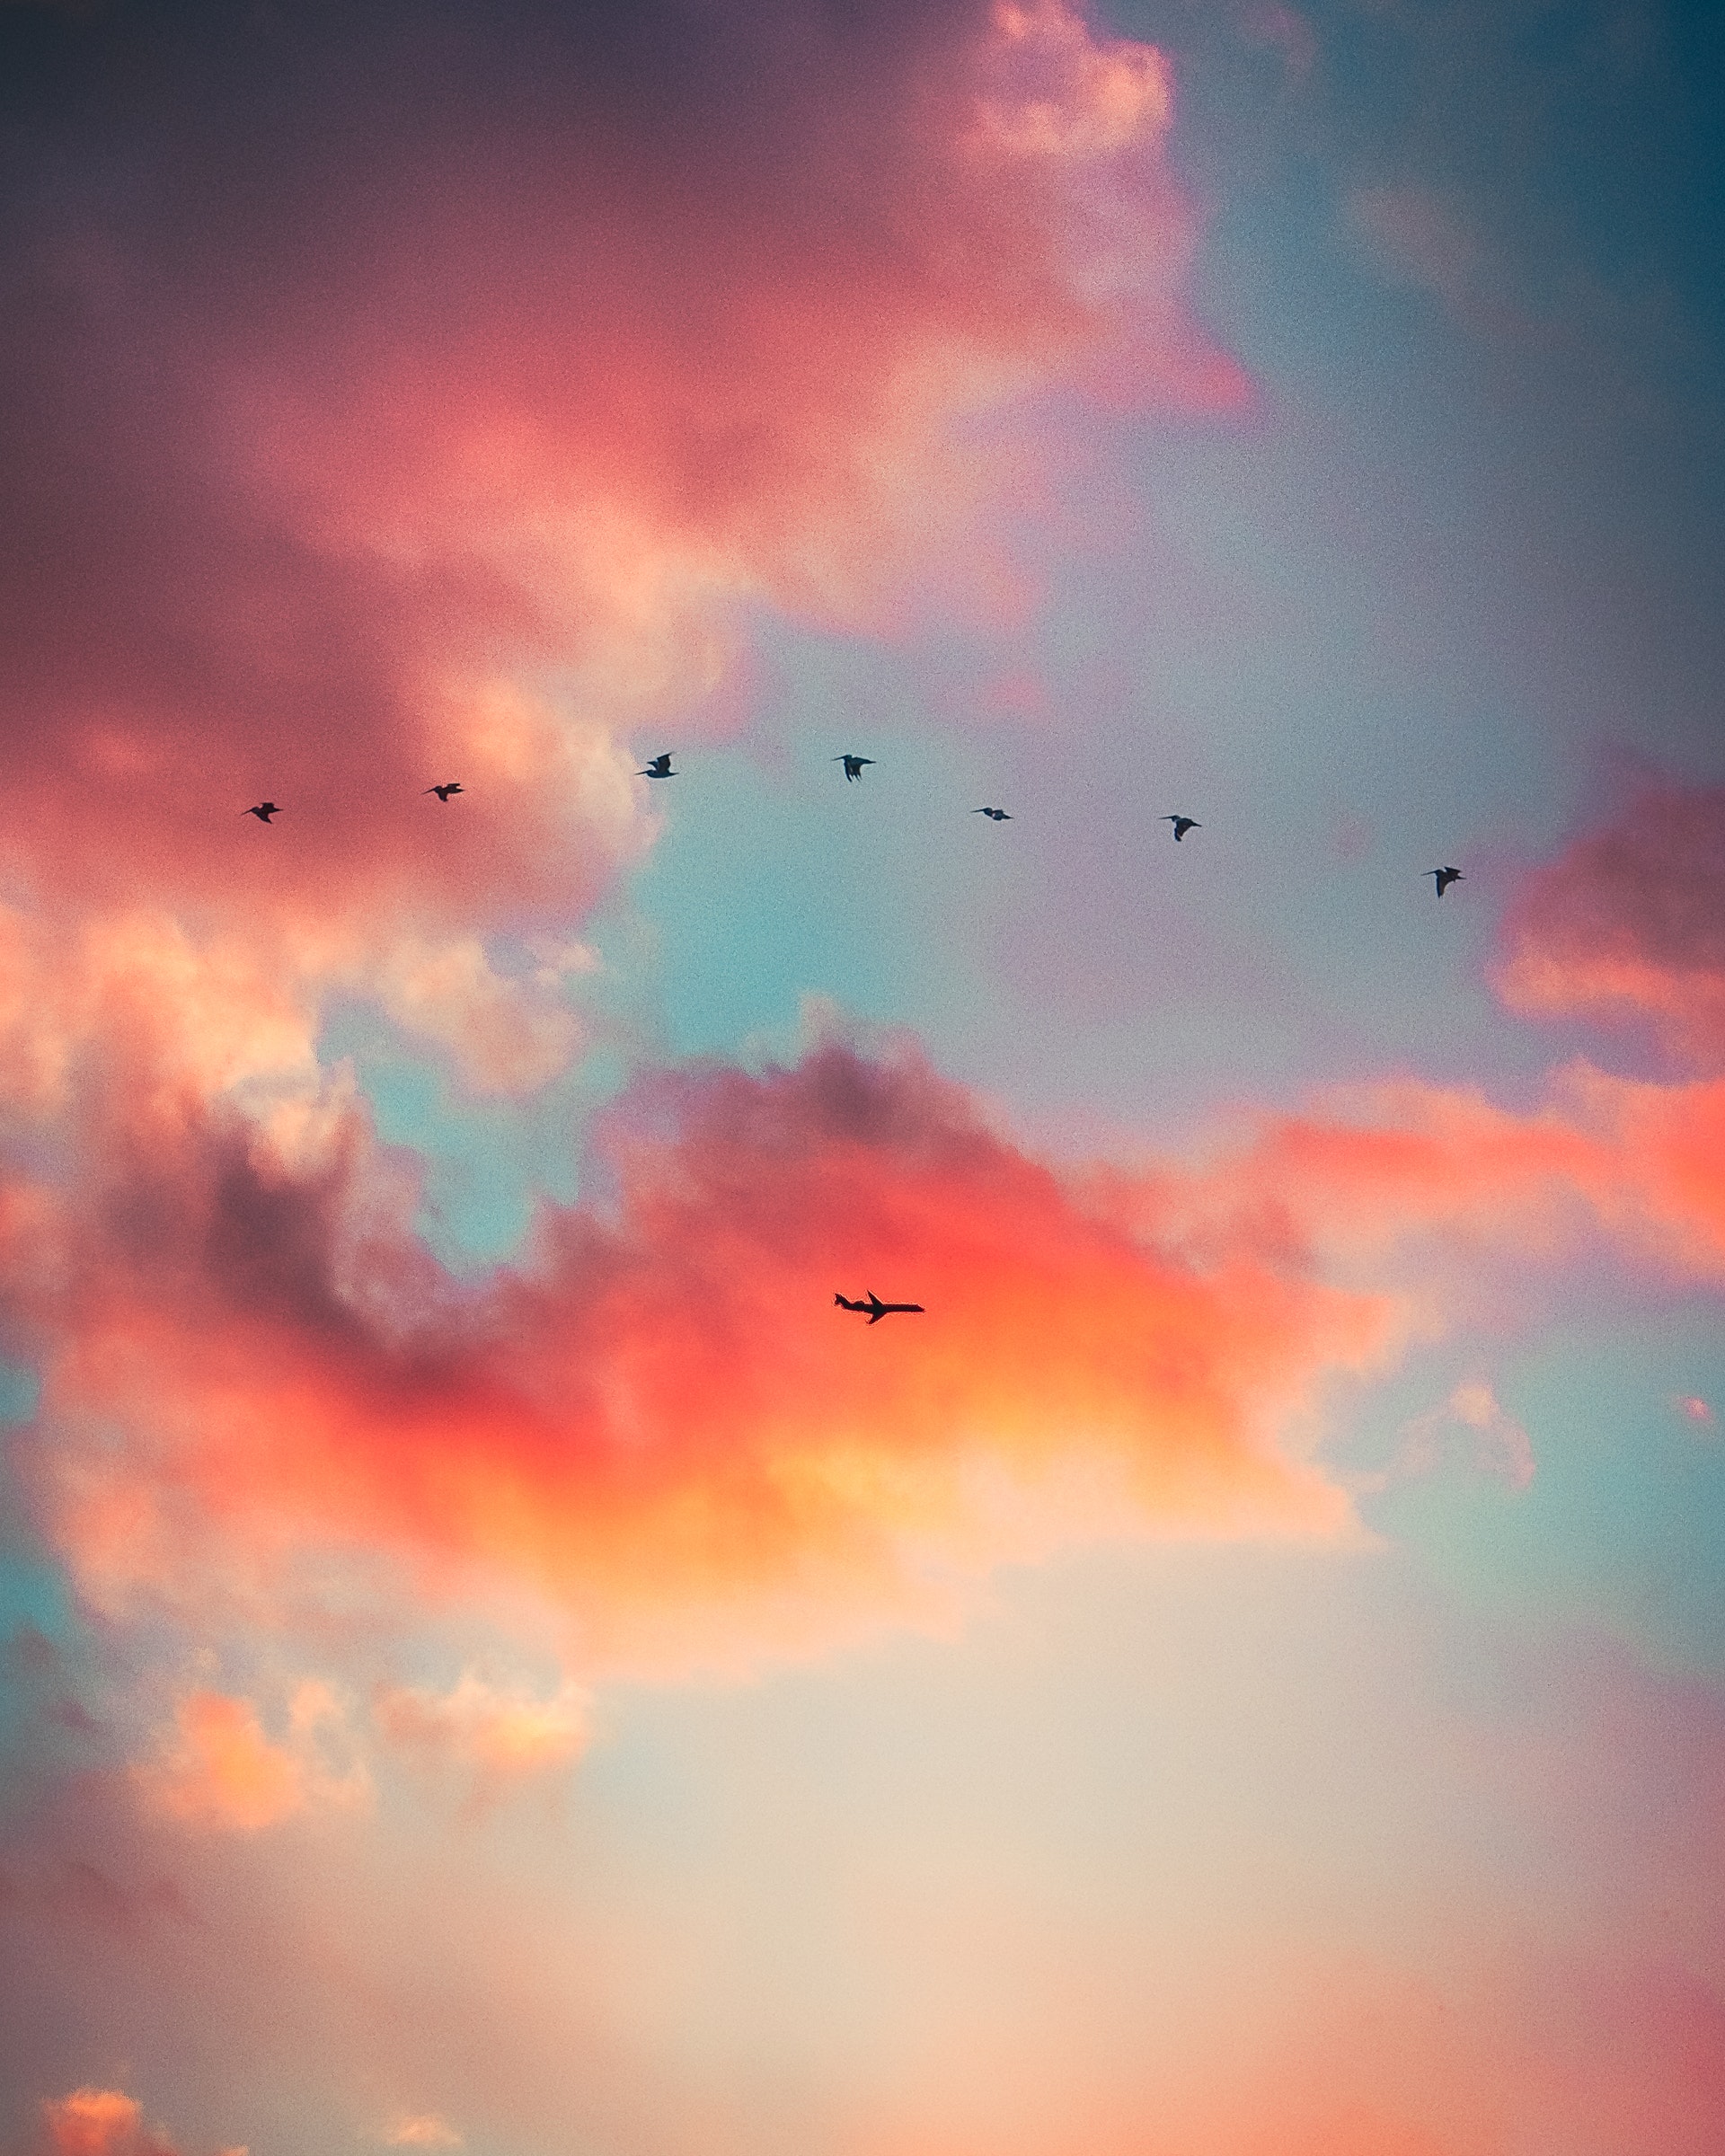 A photo of a plane and a flock of birds.